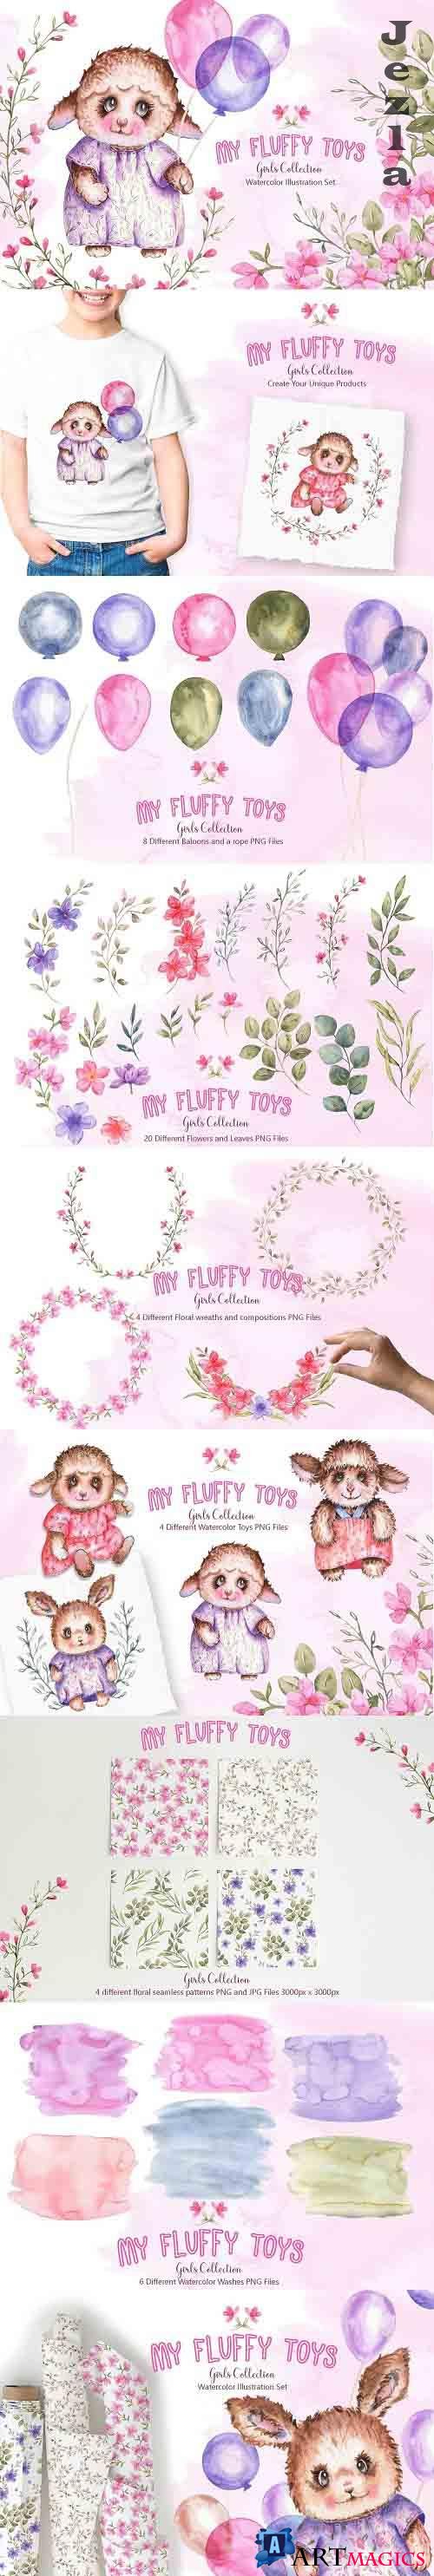 Watercolor Fluffy Toys Girls Set - 5956477